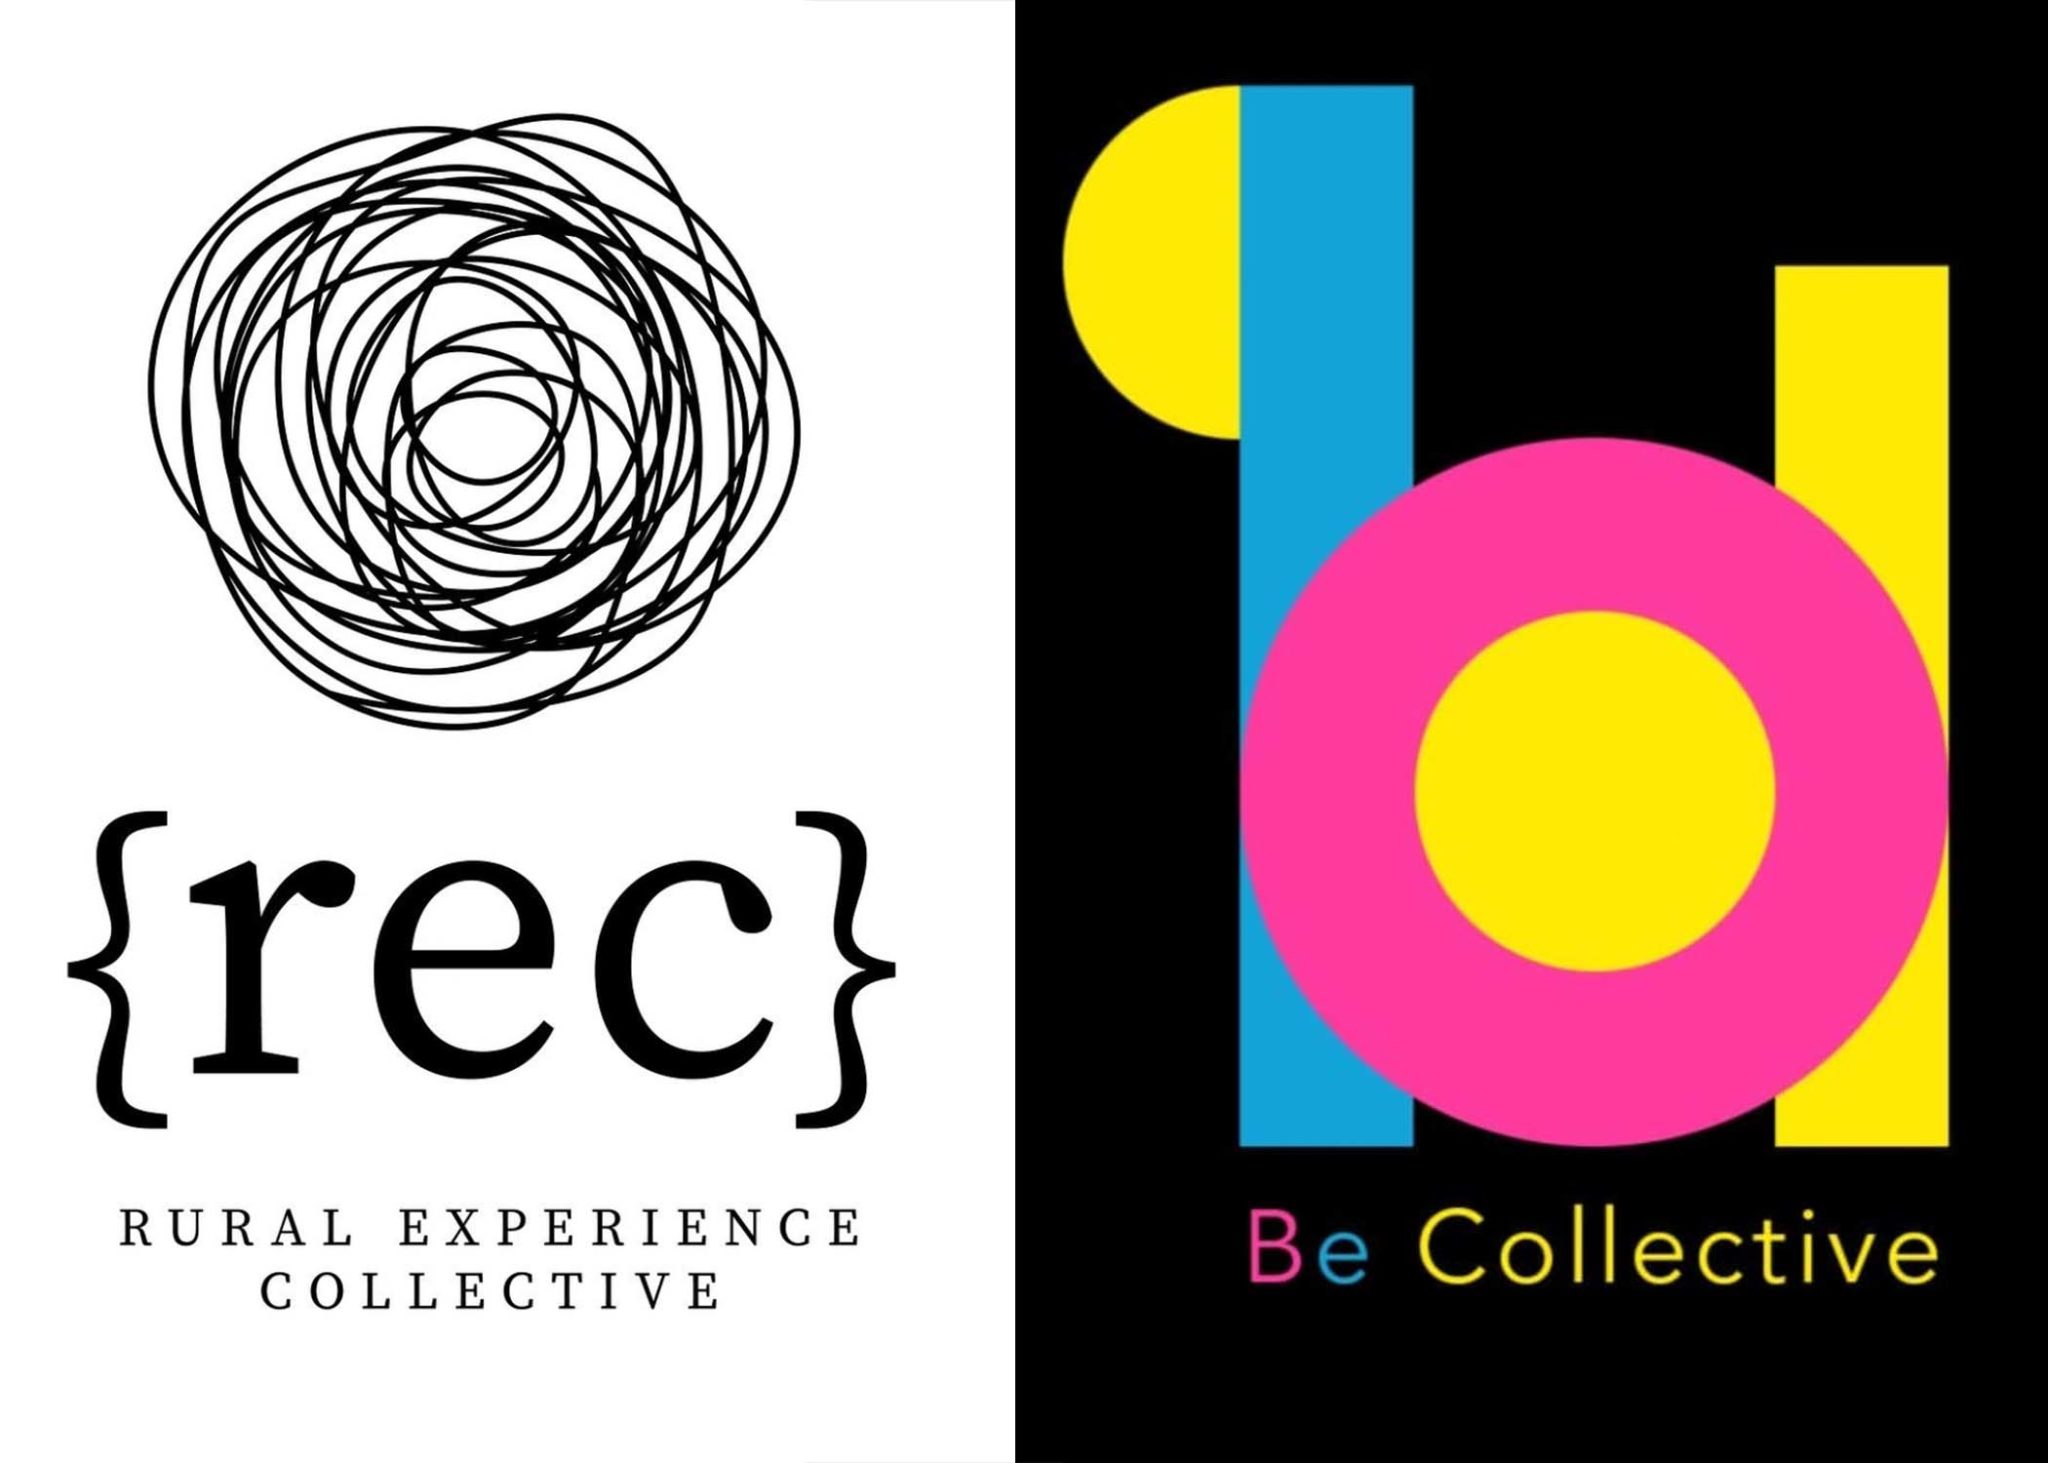 Collaborative Practices Award '21-22: Rural Experience Collective and Be Collective